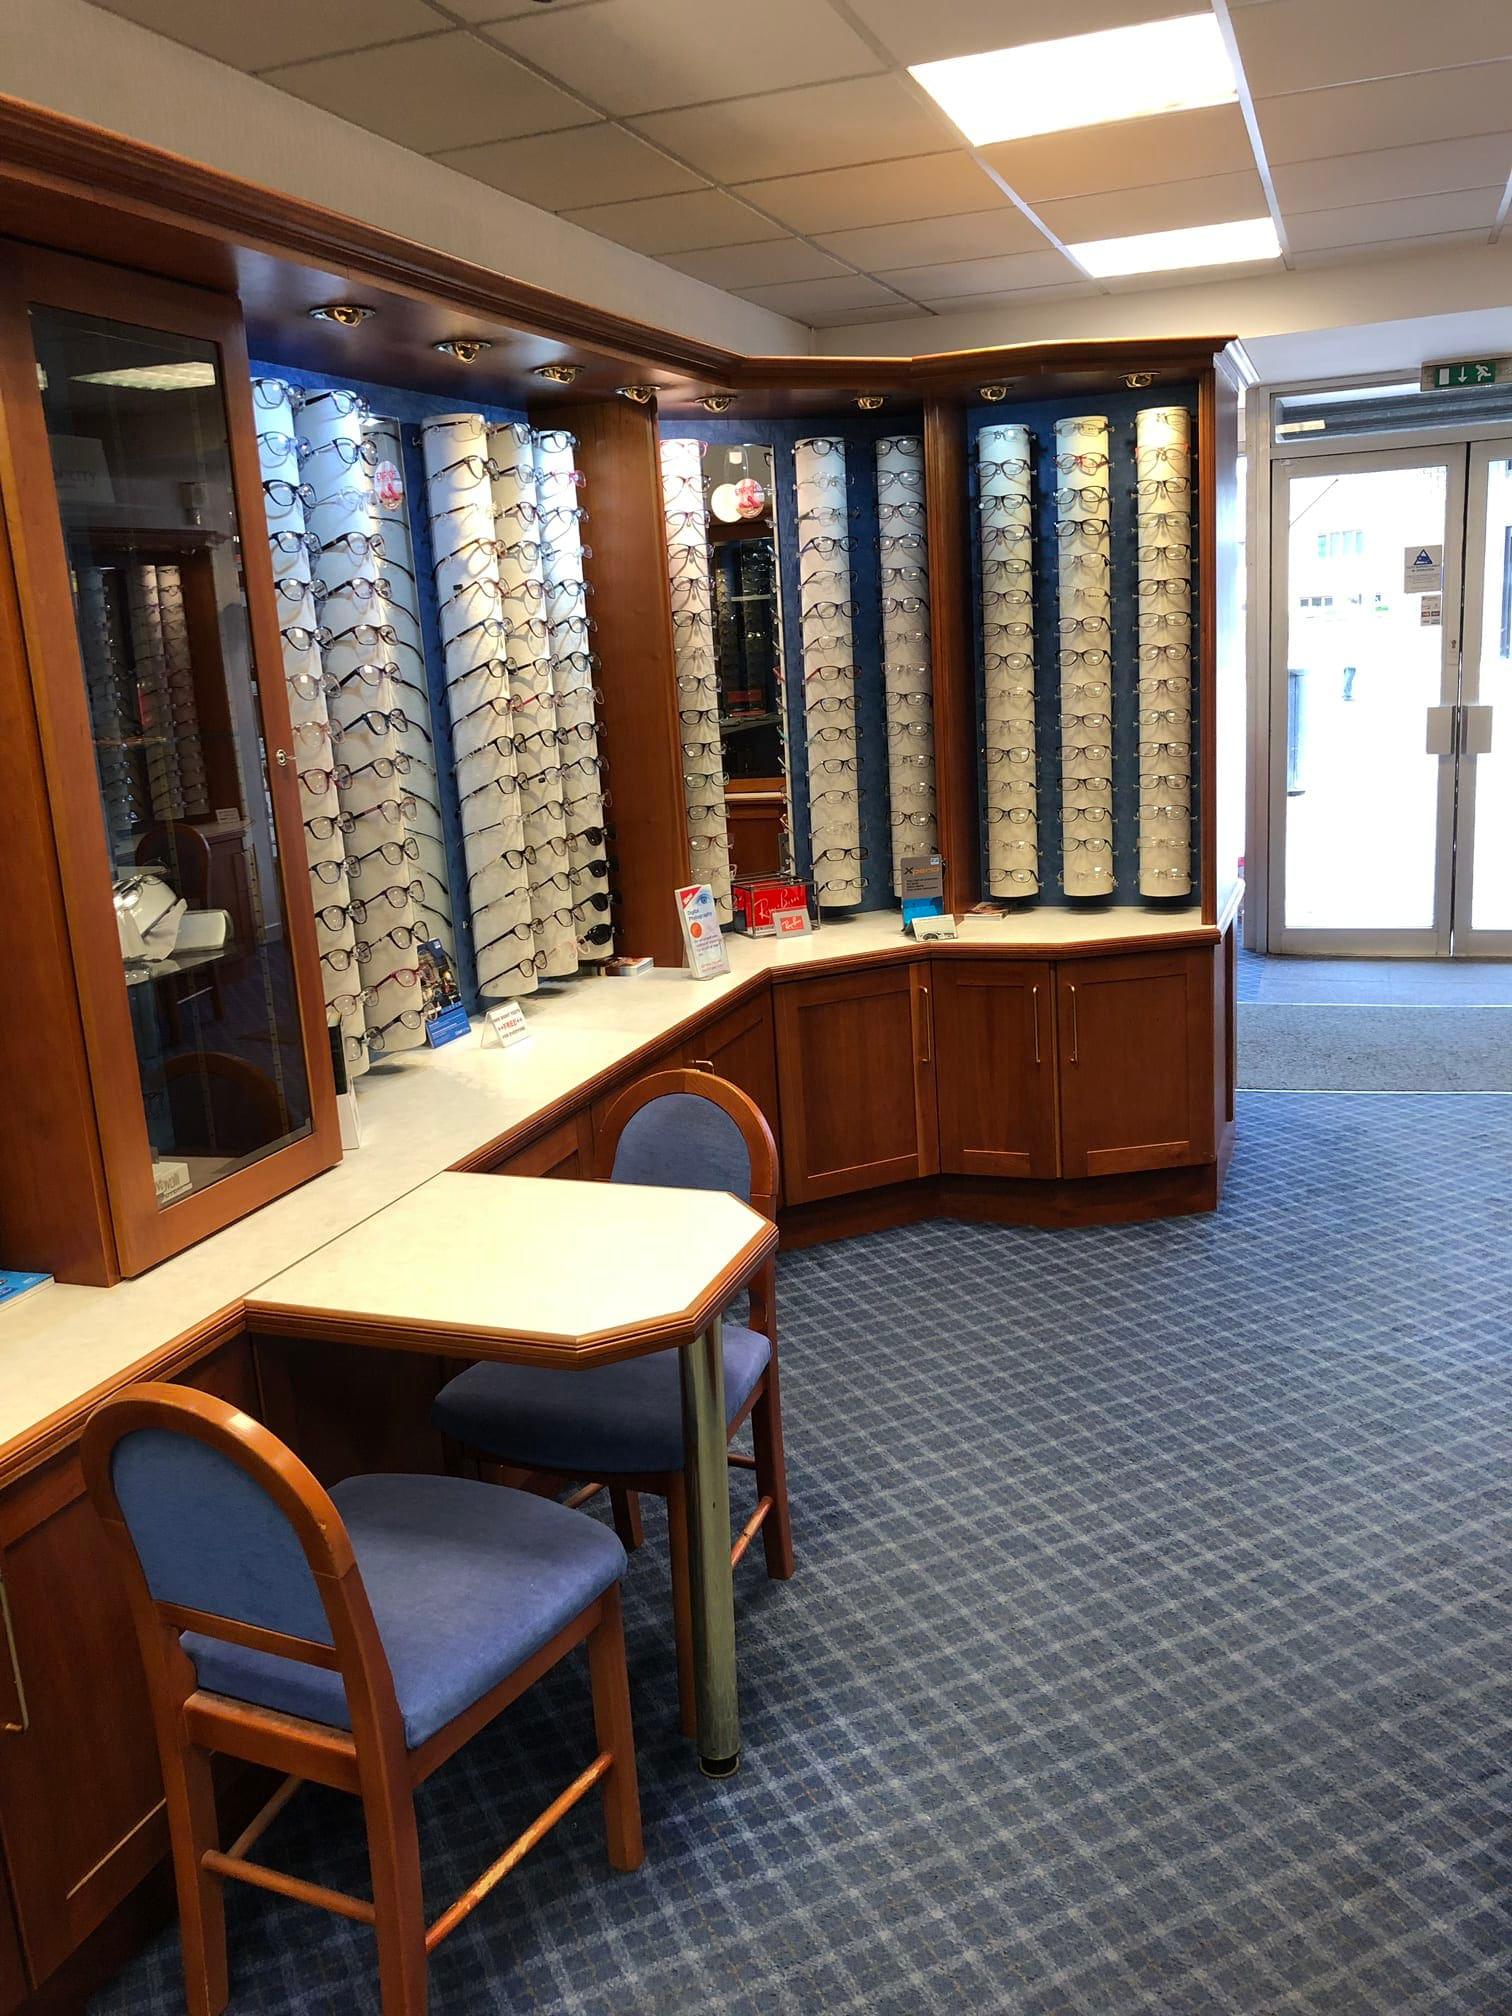 Images Dinsmore Opticians